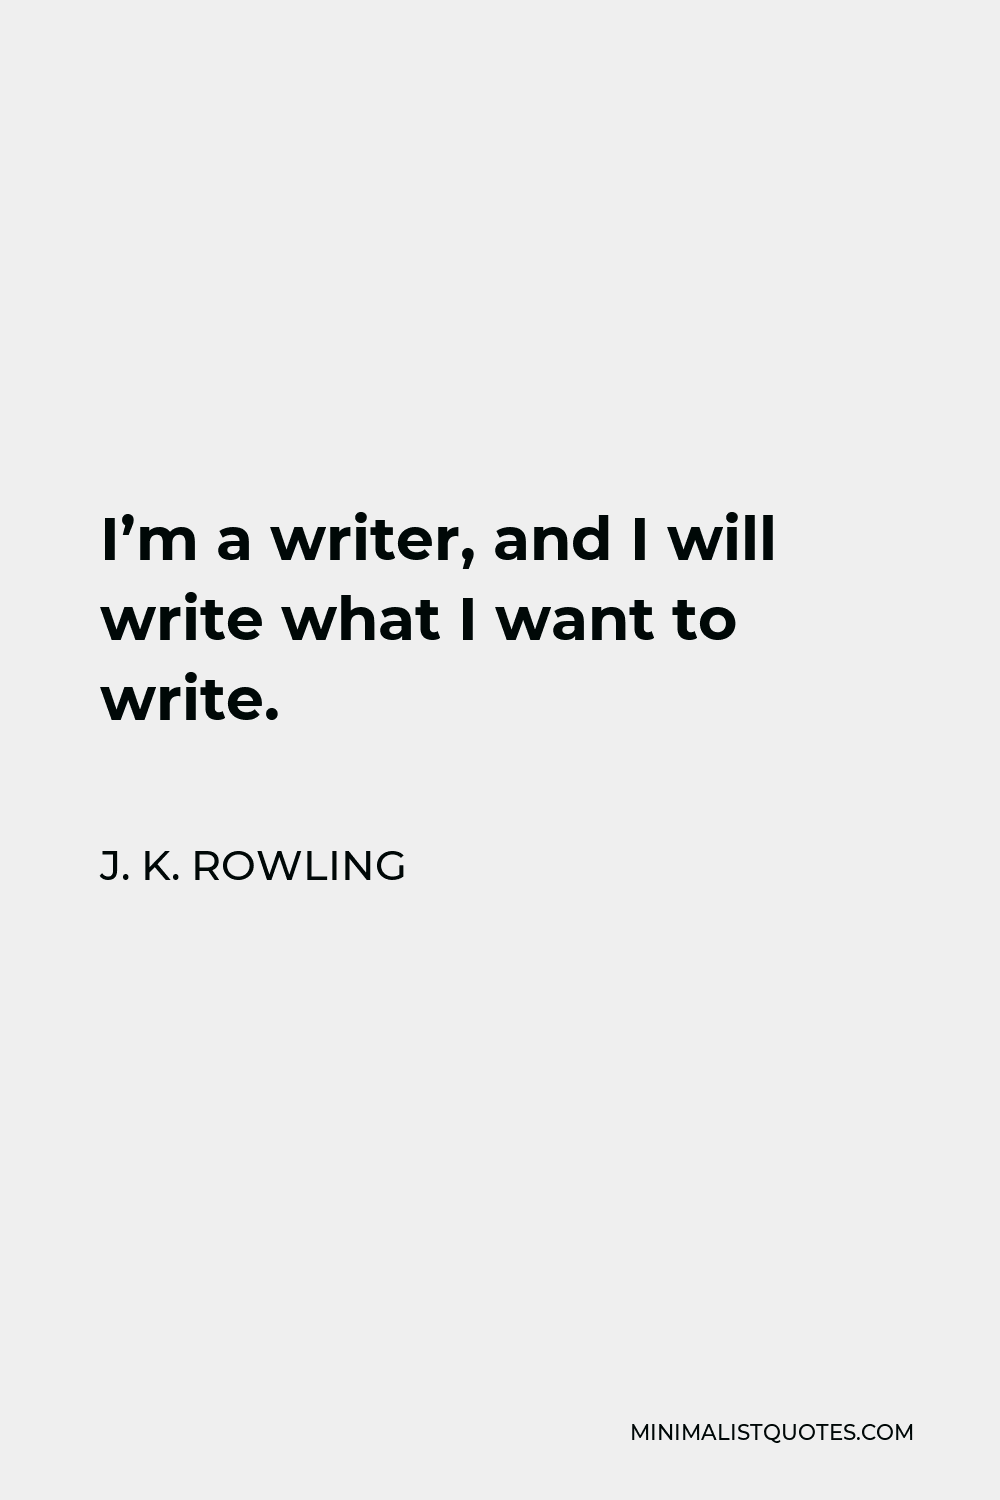 J. K. Rowling Quote - I’m a writer, and I will write what I want to write.